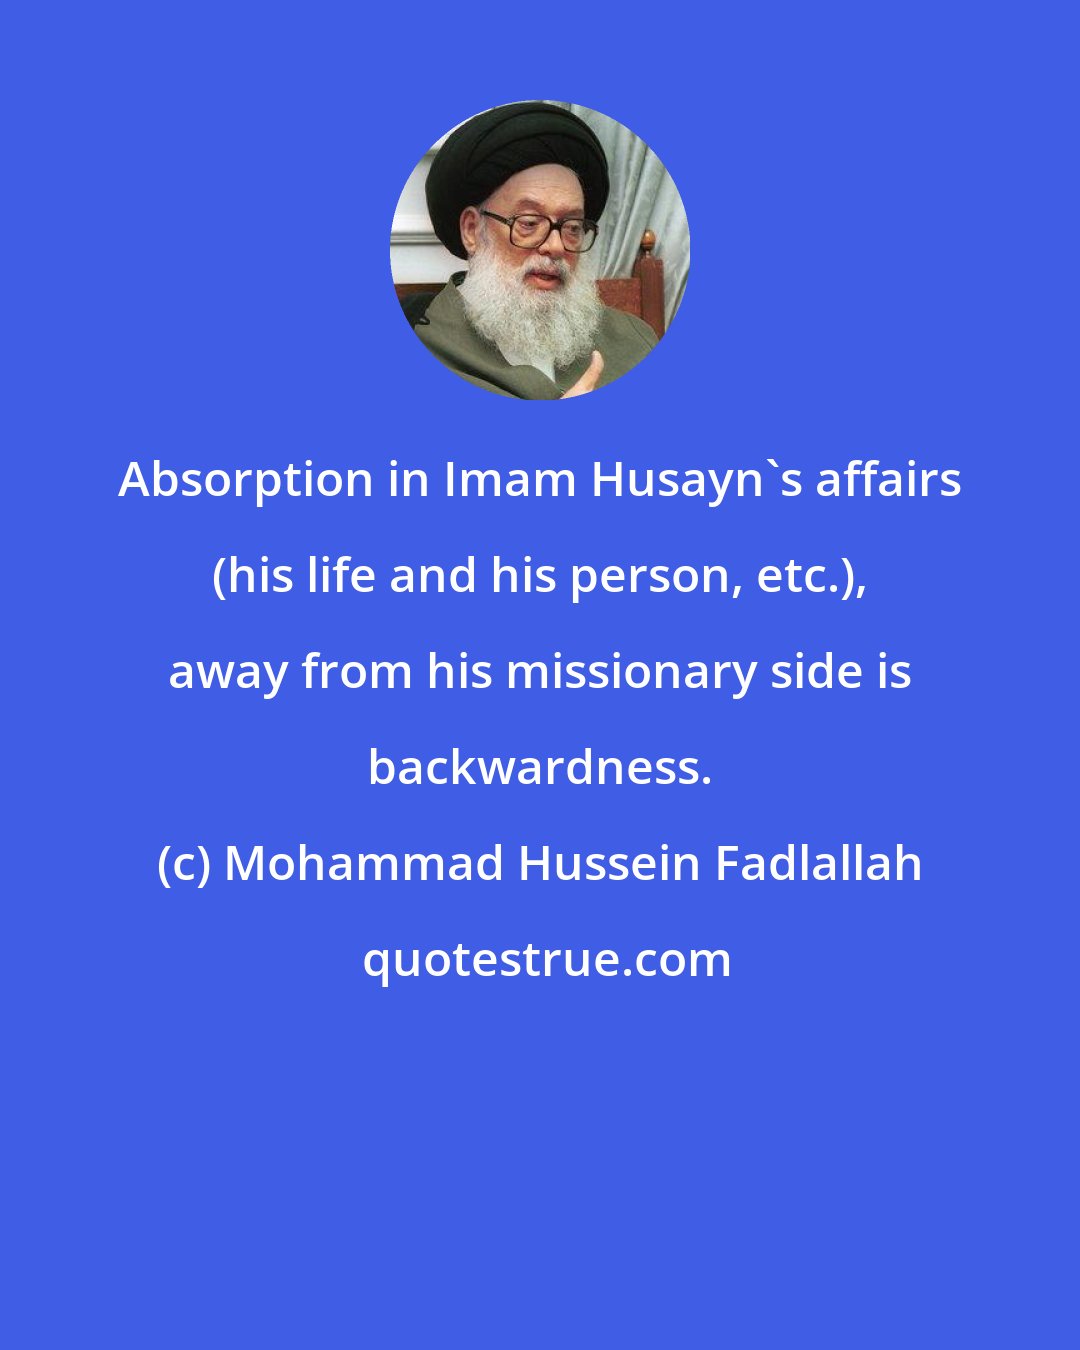 Mohammad Hussein Fadlallah: Absorption in Imam Husayn's affairs (his life and his person, etc.), away from his missionary side is backwardness.